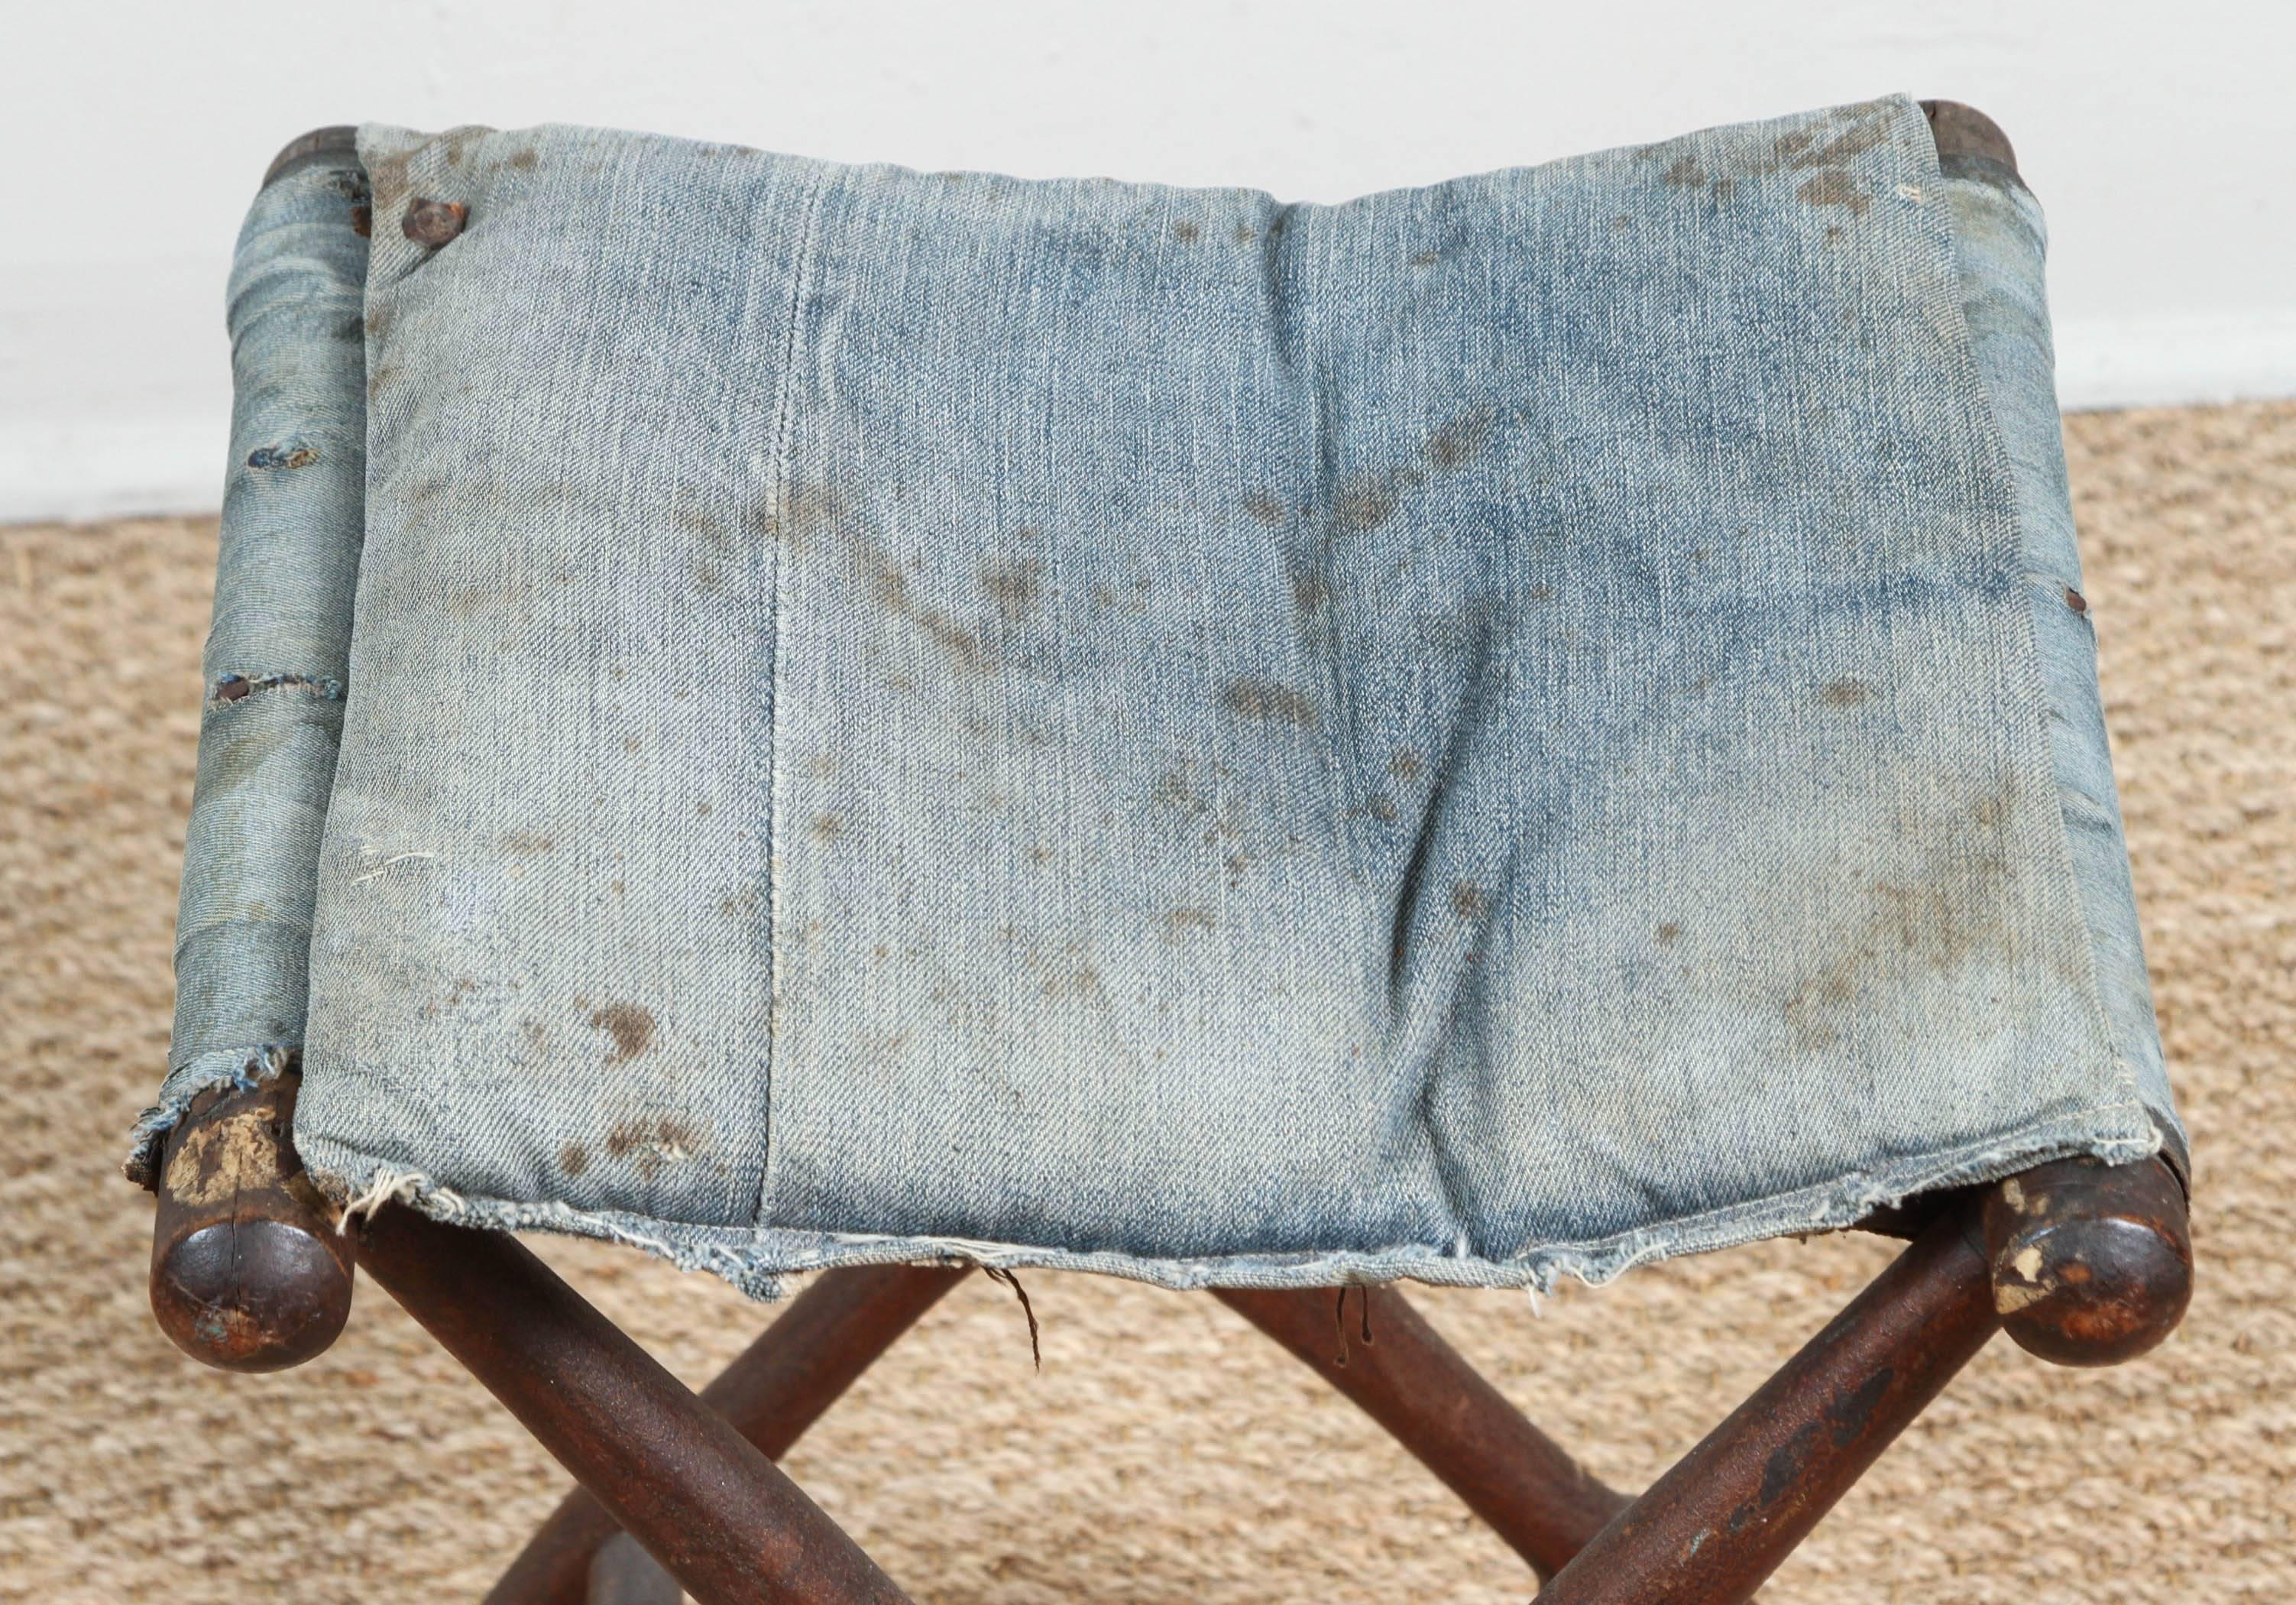 Vintage Folding Stool with Distressed and Faded Denim For Sale 2